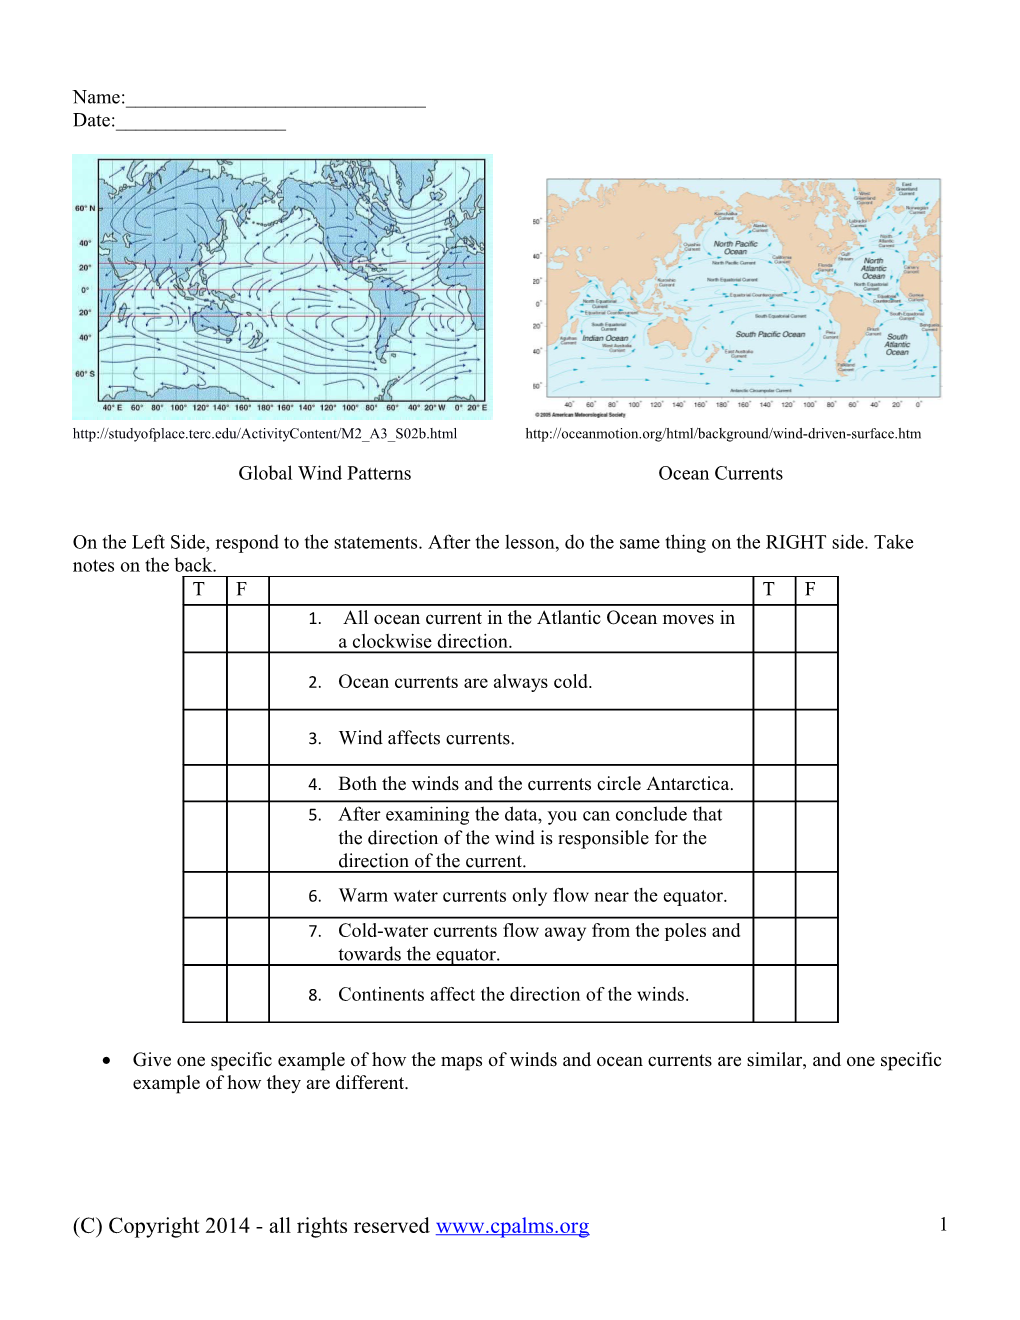 Activity: Examining the Effect of Wind on Ocean Currents